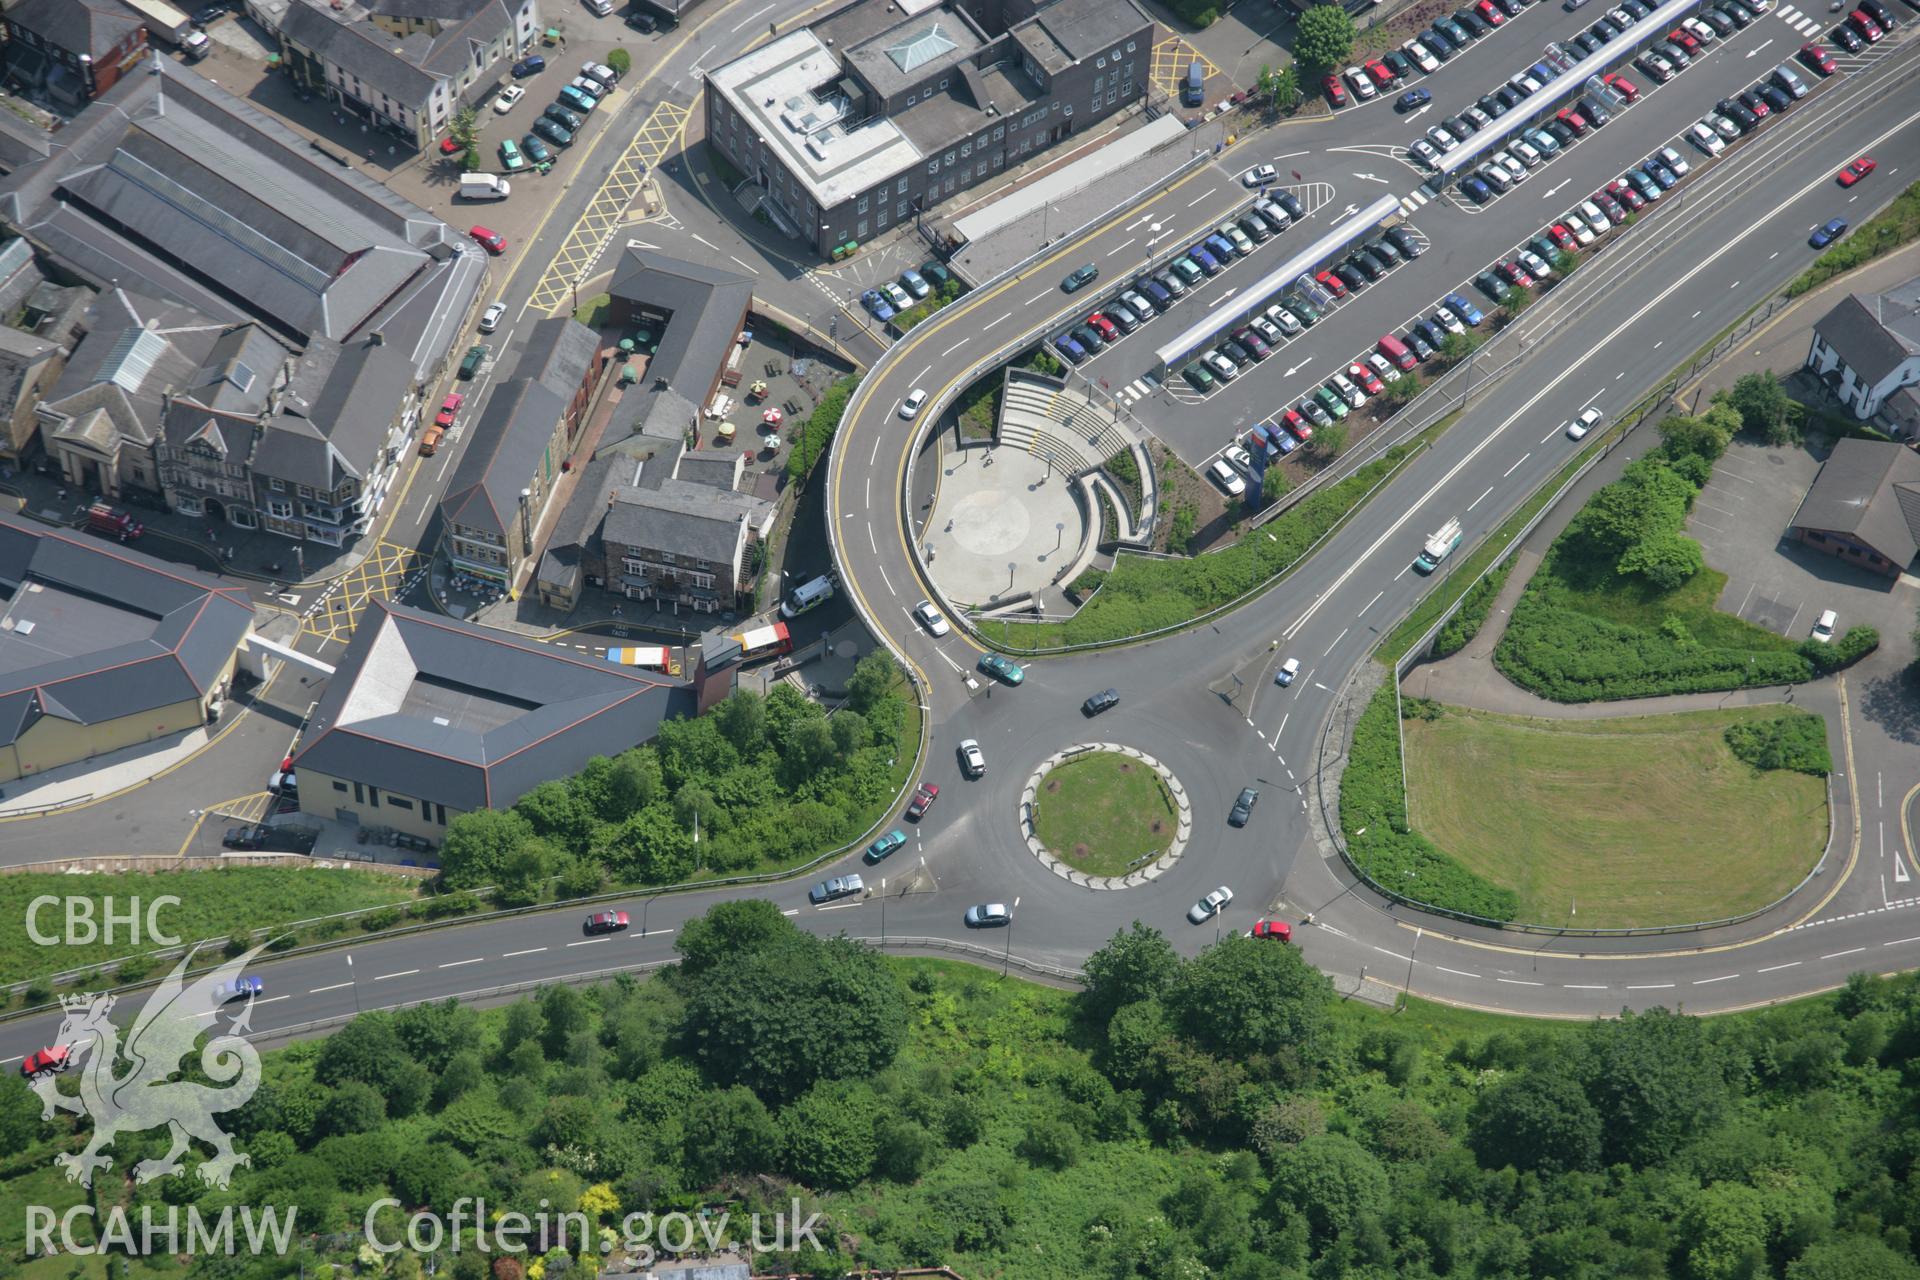 RCAHMW colour oblique aerial photograph of Pontypool from the west showing the town centre and roundabout. Taken on 09 June 2006 by Toby Driver.